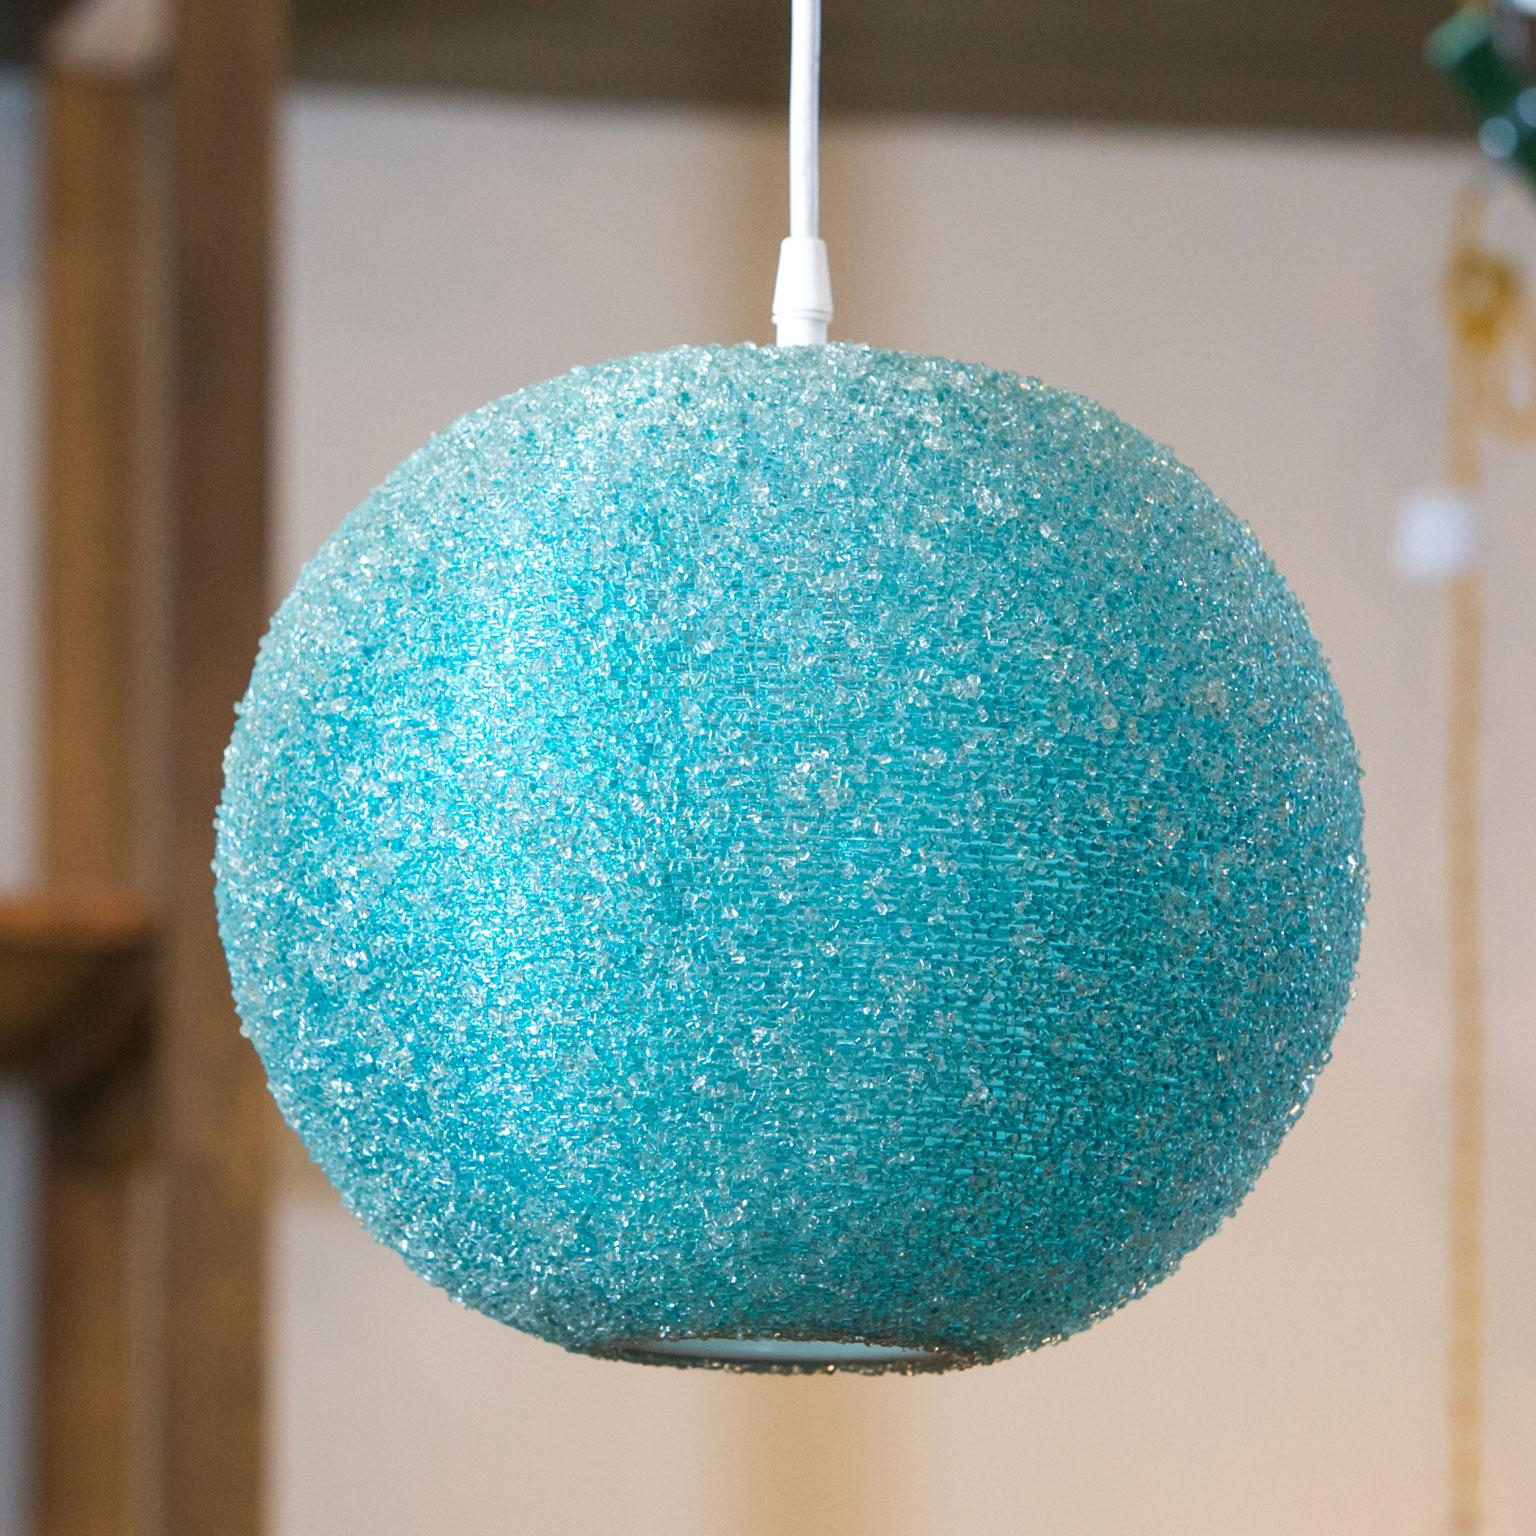 Modern textured globe-shaped light fabricated in plastic resin. This fun light might be interesting in a modern or coastal setting. This light is ball-shaped and looks like a full moon when lit. Newly wired for use within the USA. Includes white